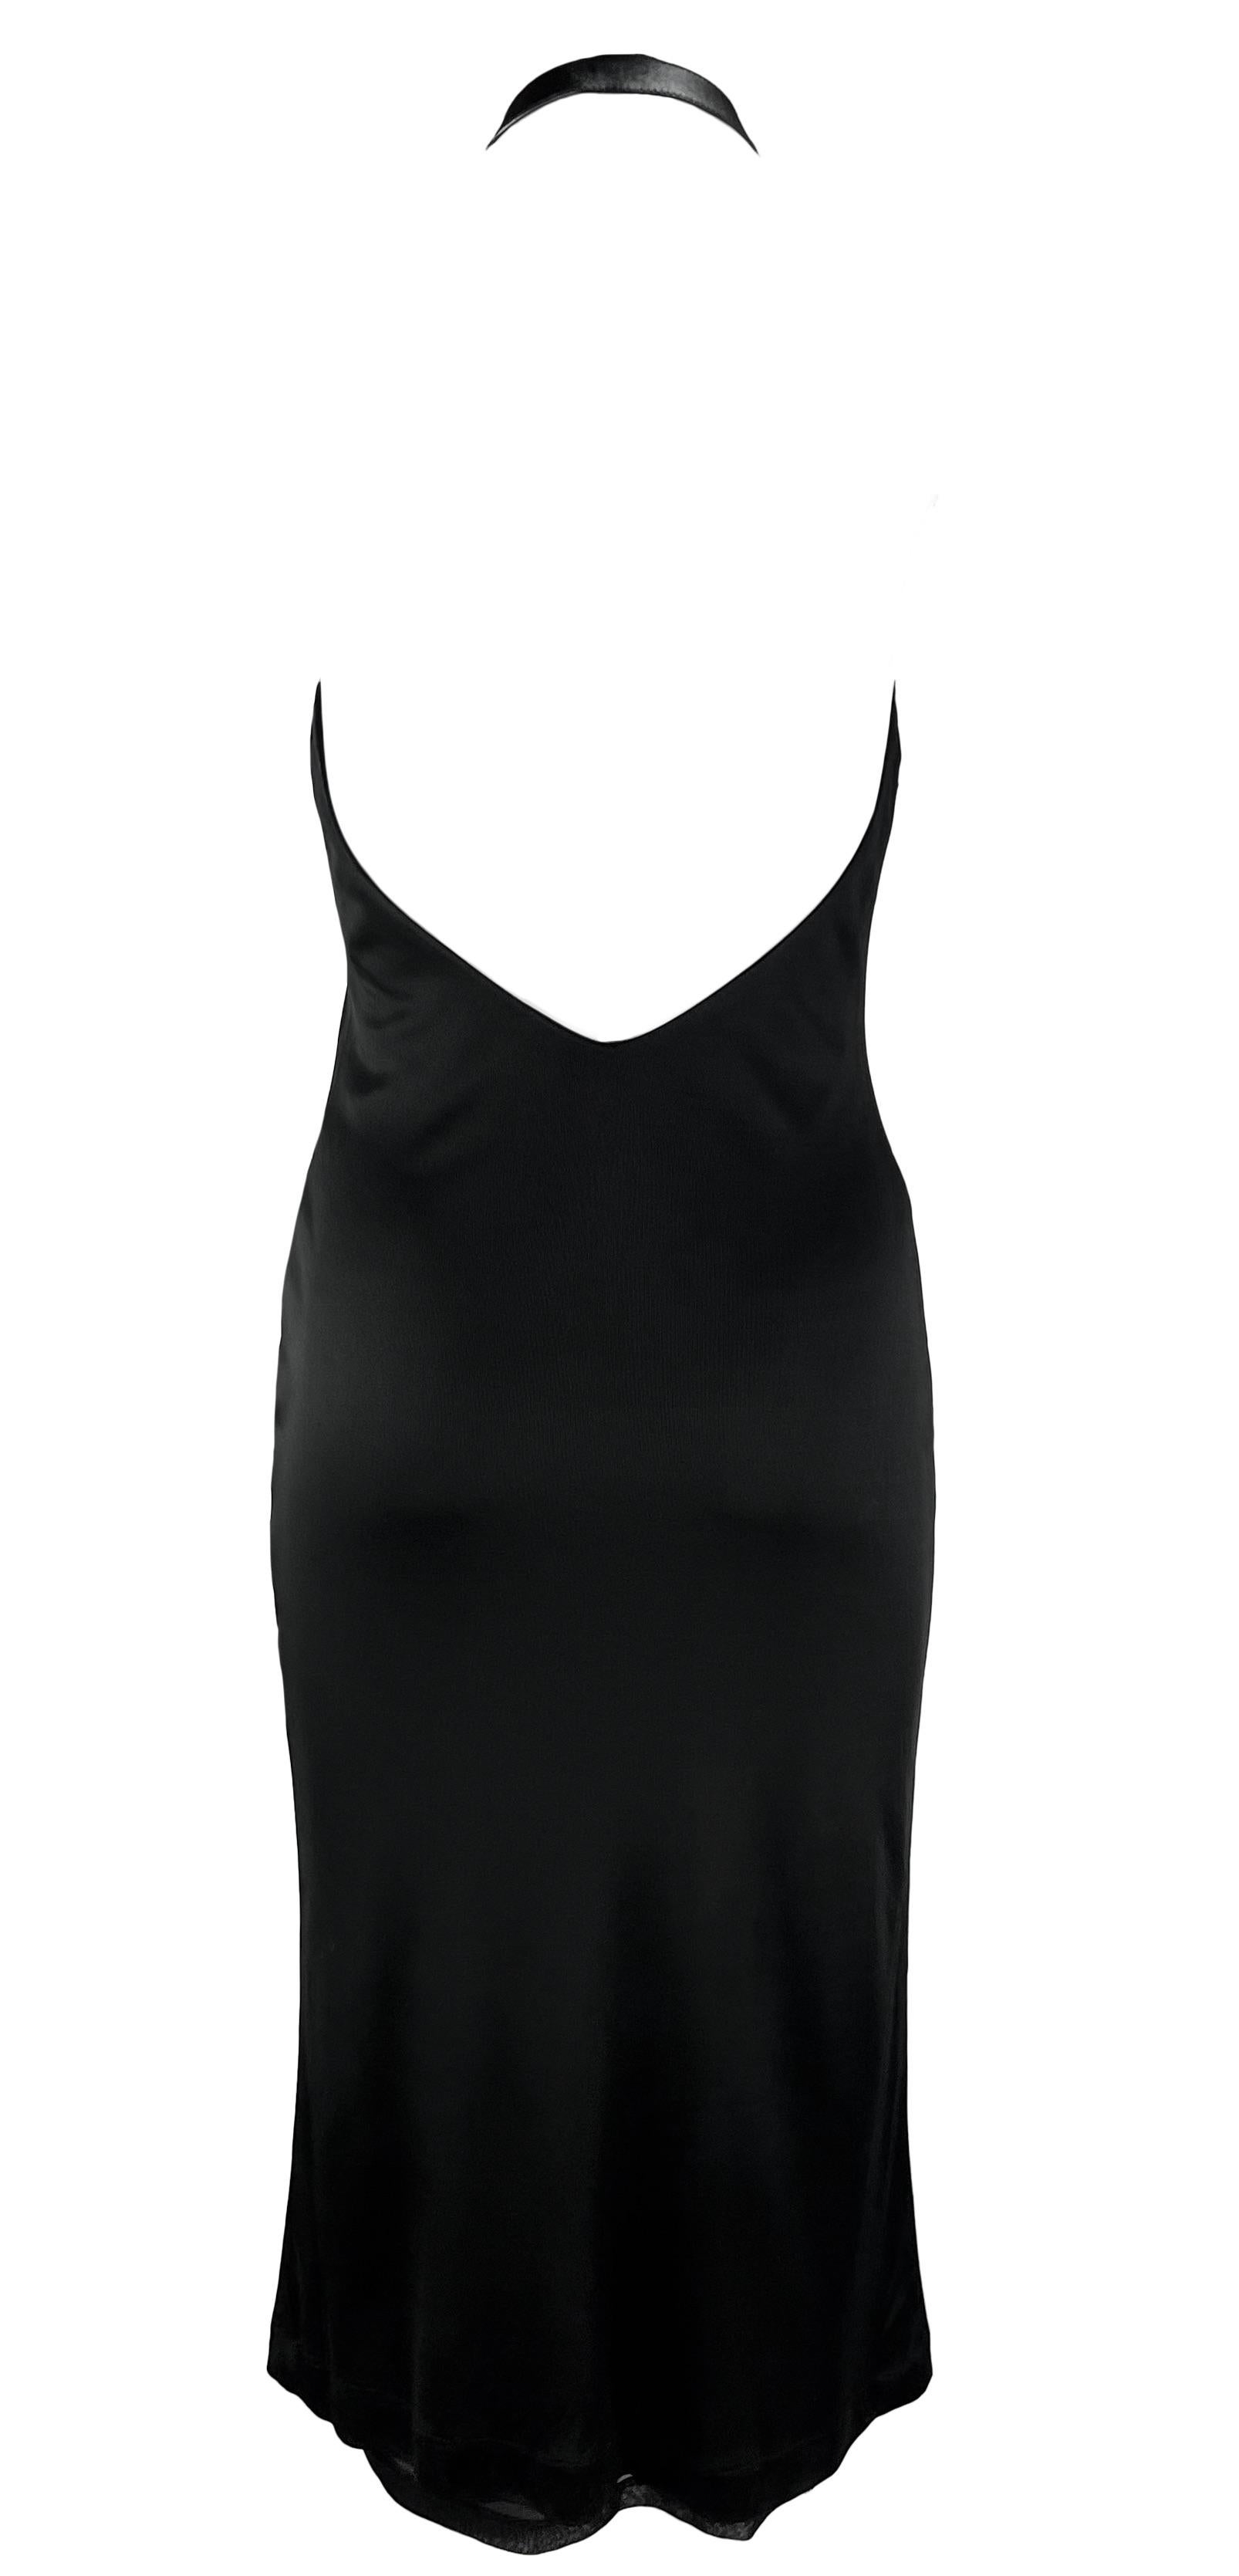 S/S 2001 Gucci by Tom Ford Black Leather Halter Strap Plunging Backless Dress For Sale 1